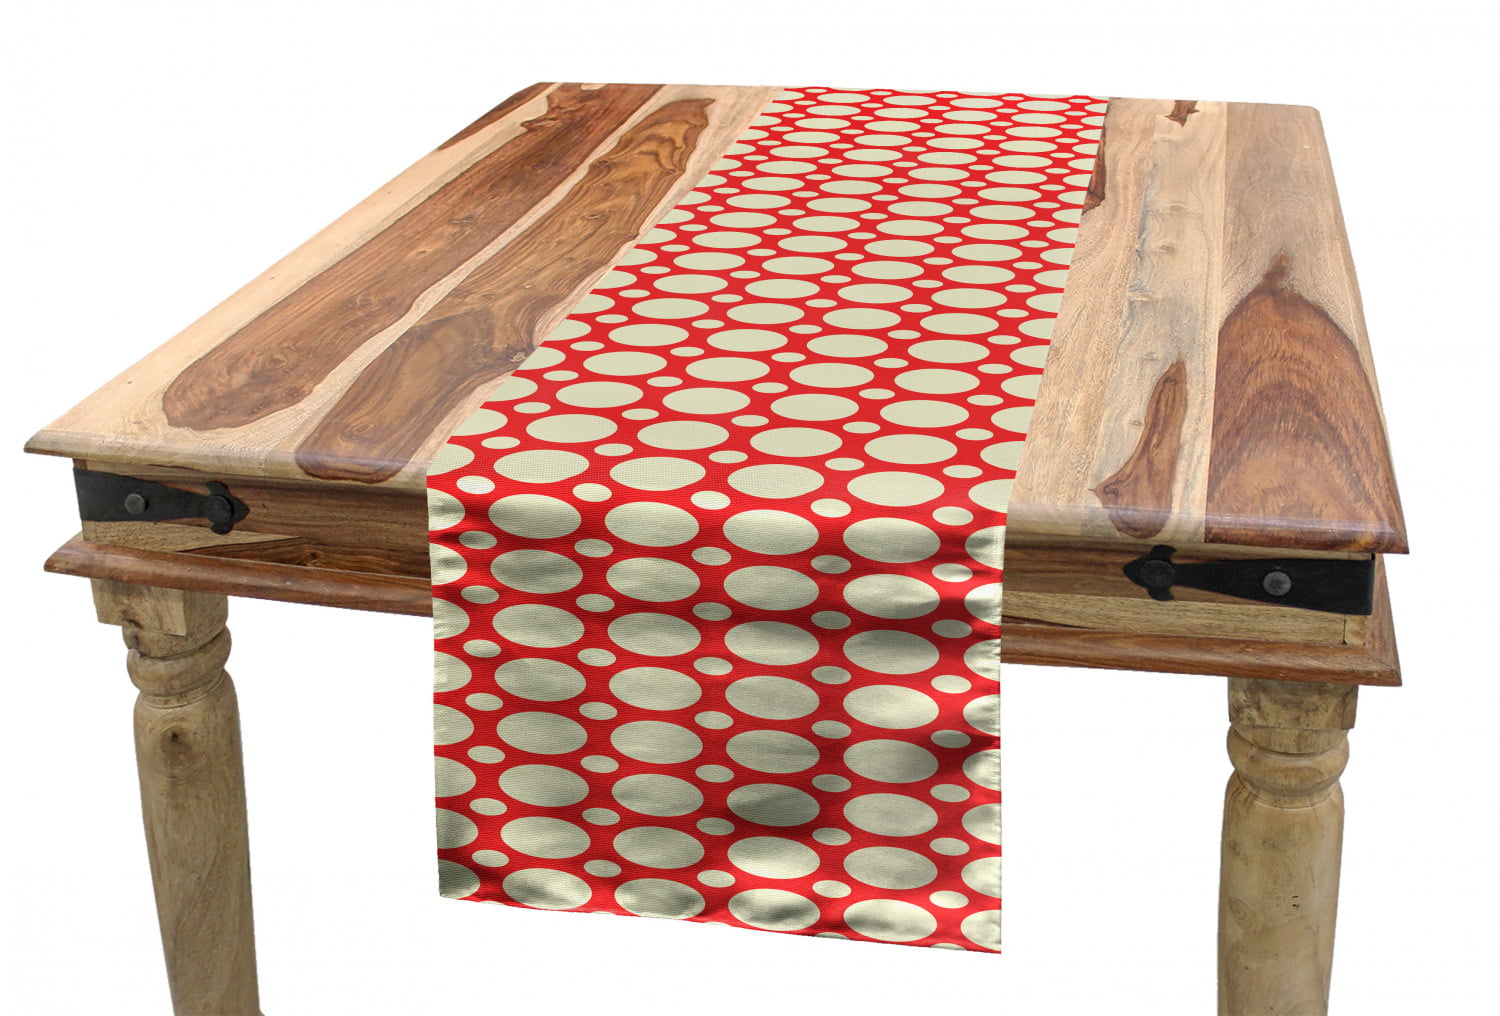 Dining Room Kitchen Rectangular Runner Pale Yellow Red Big Little Polka Dots Vibrant Toned Background Contrasting Colors Design Ambesonne Geometric Table Runner 16 X 90